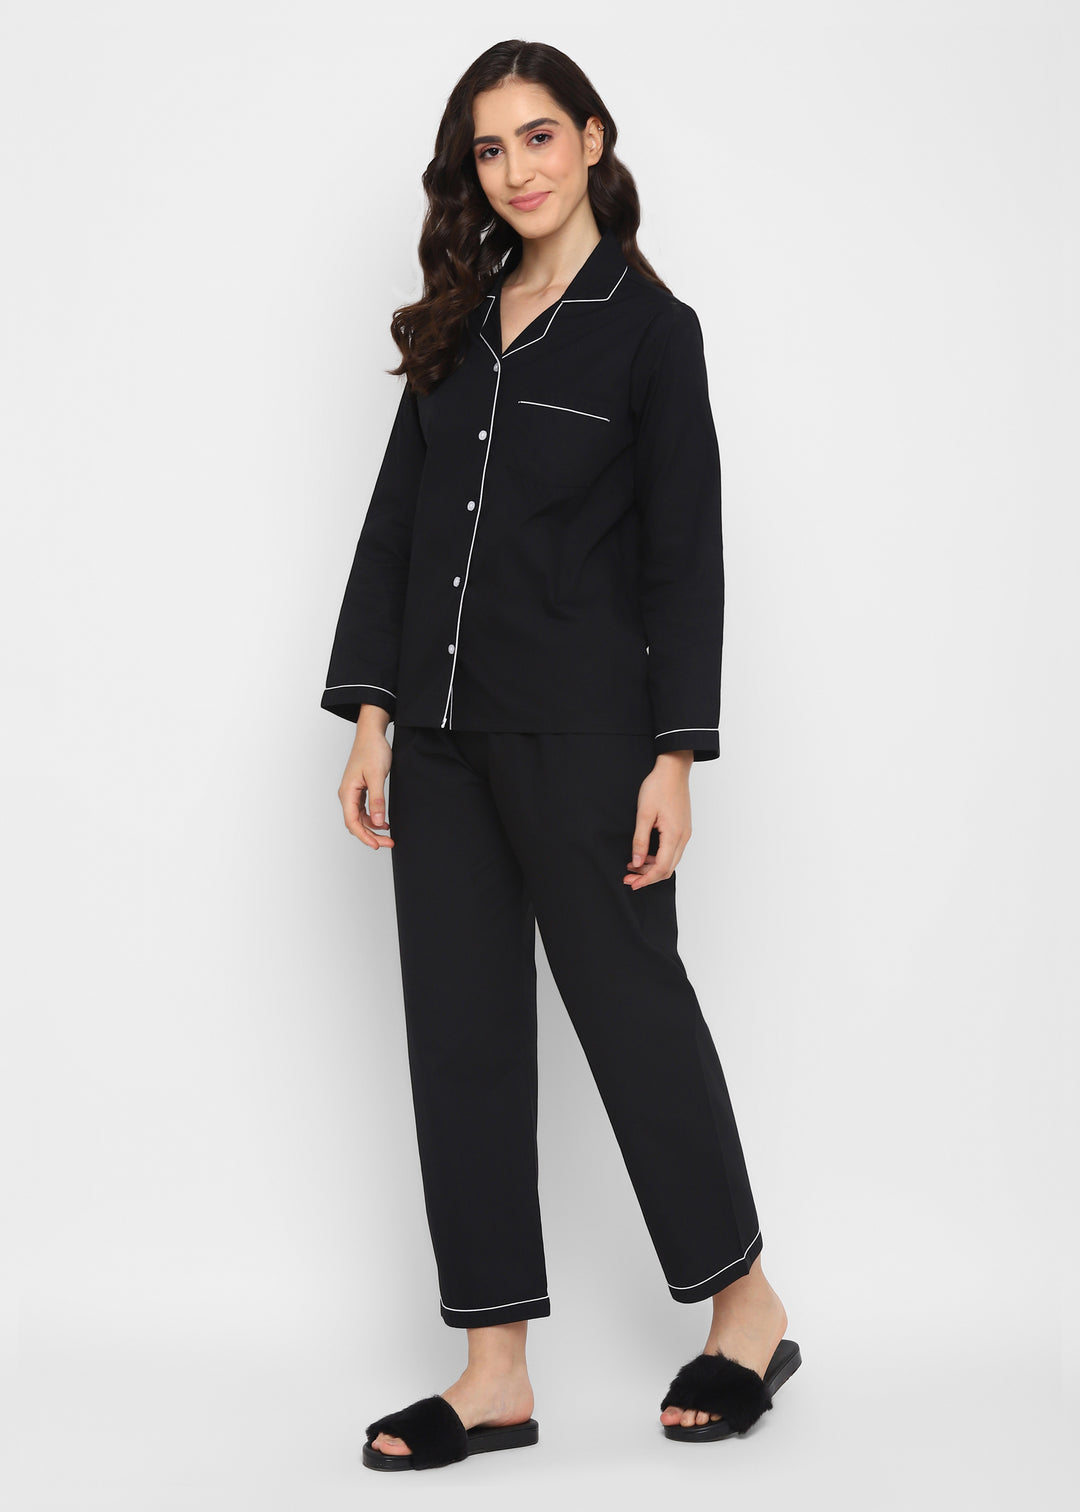 Black Cotton Poplin with White Piping Women's Night Suit